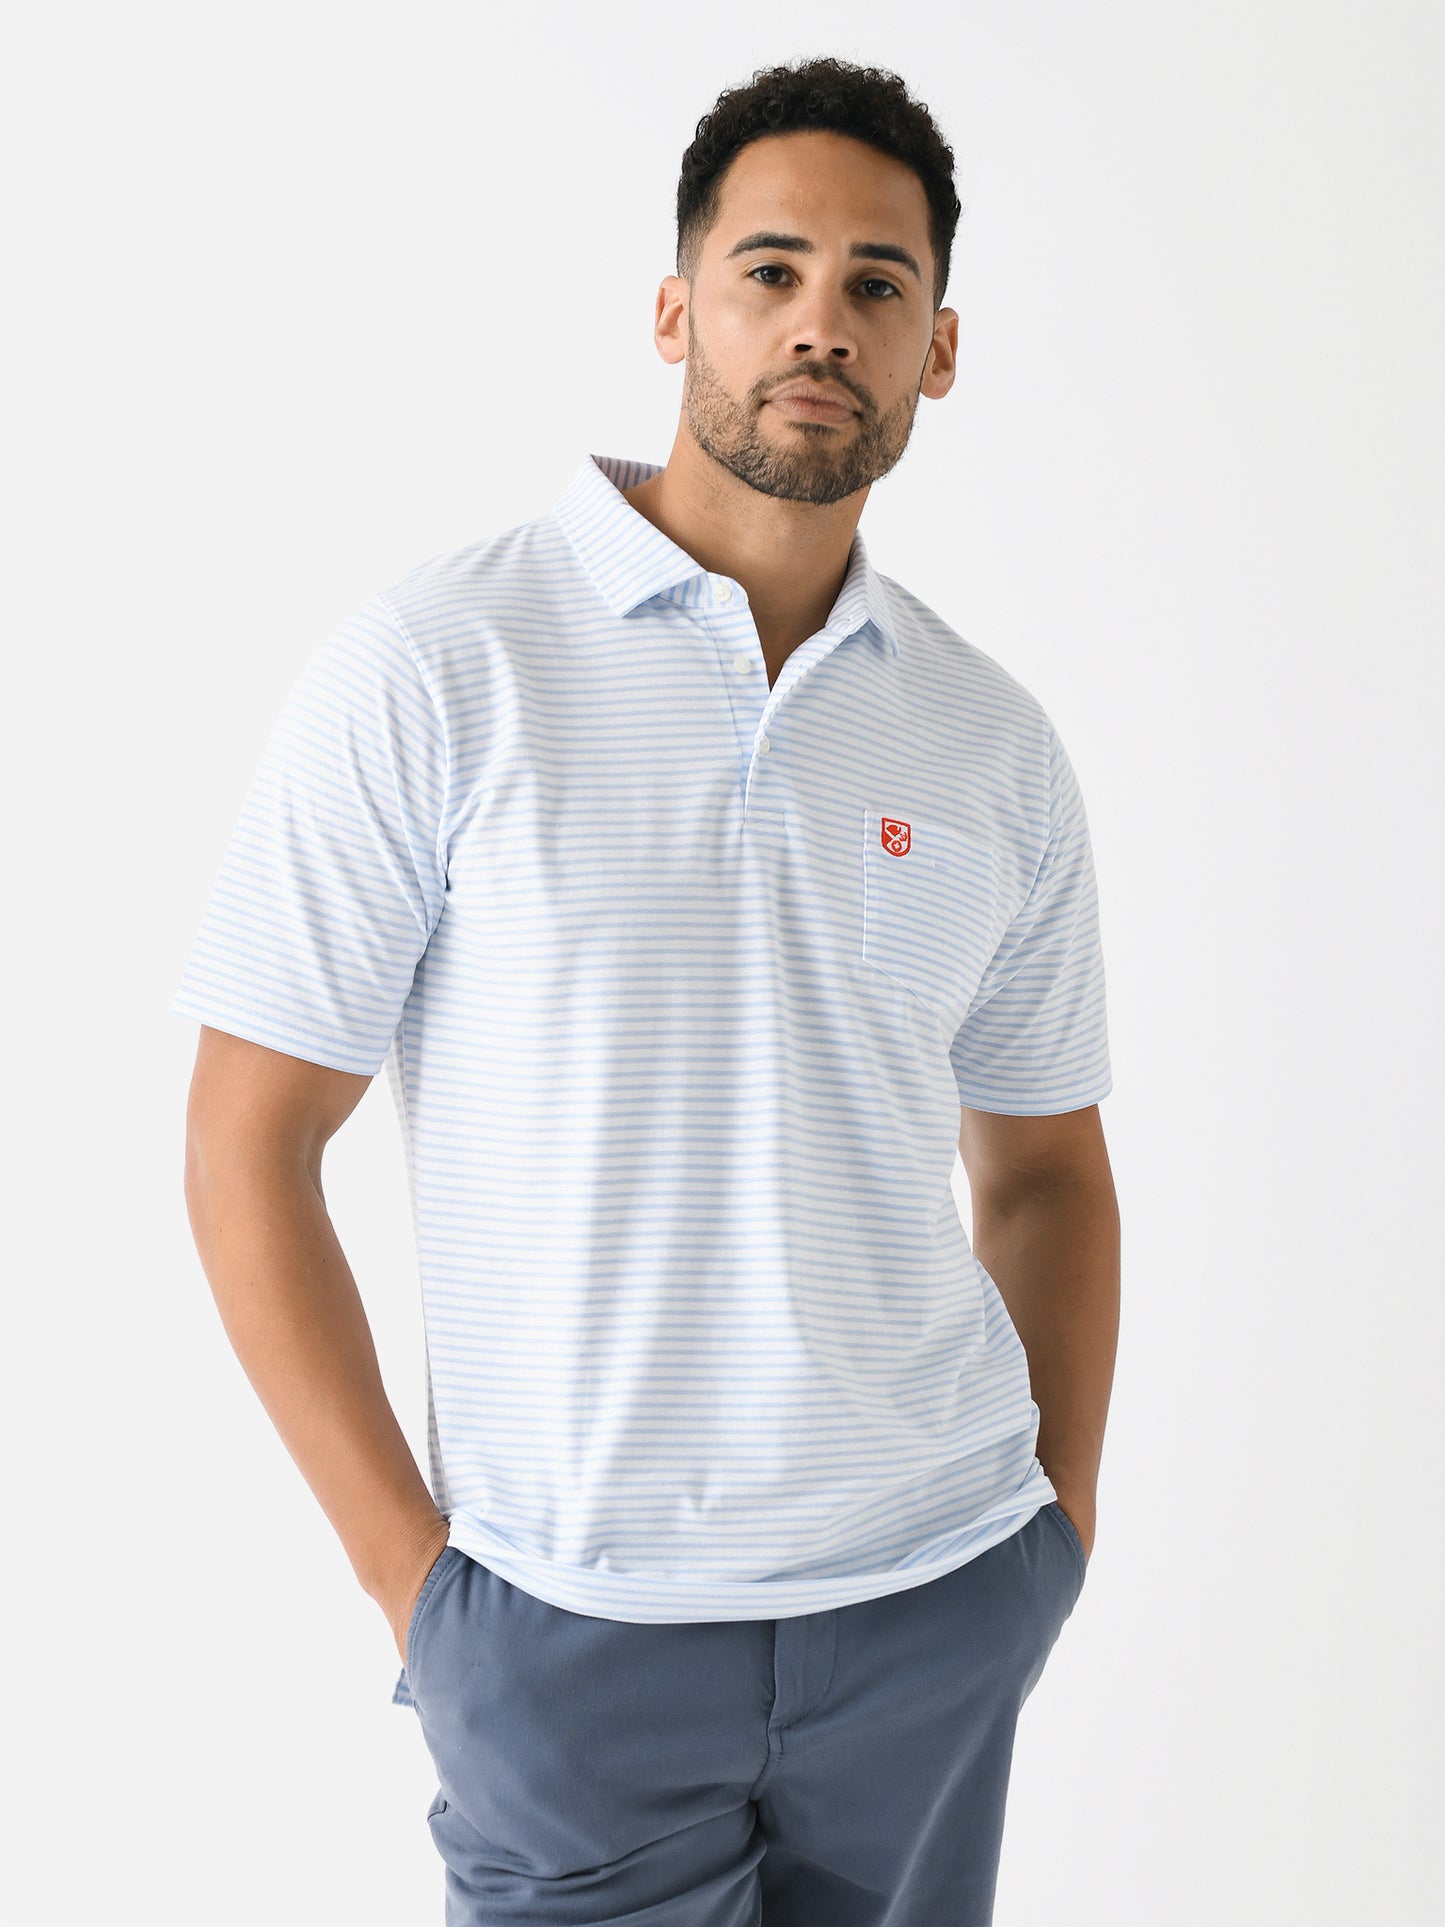 B.Draddy Men's SB Embroidery Tommy Polo